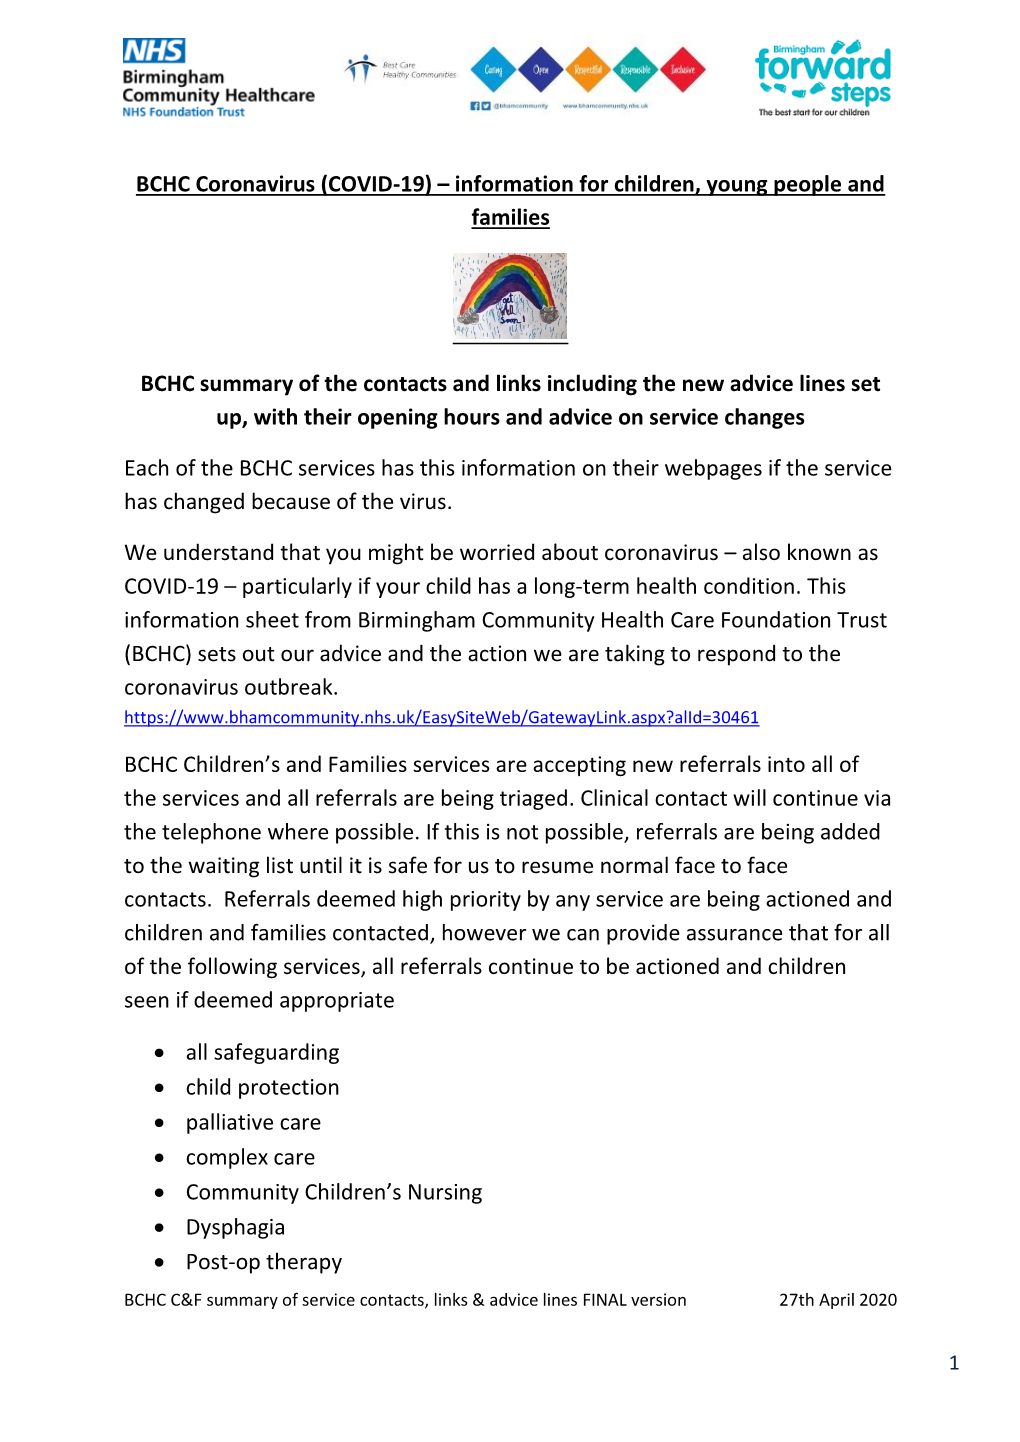 (COVID-19) – Information for Children, Young People and Families BCHC